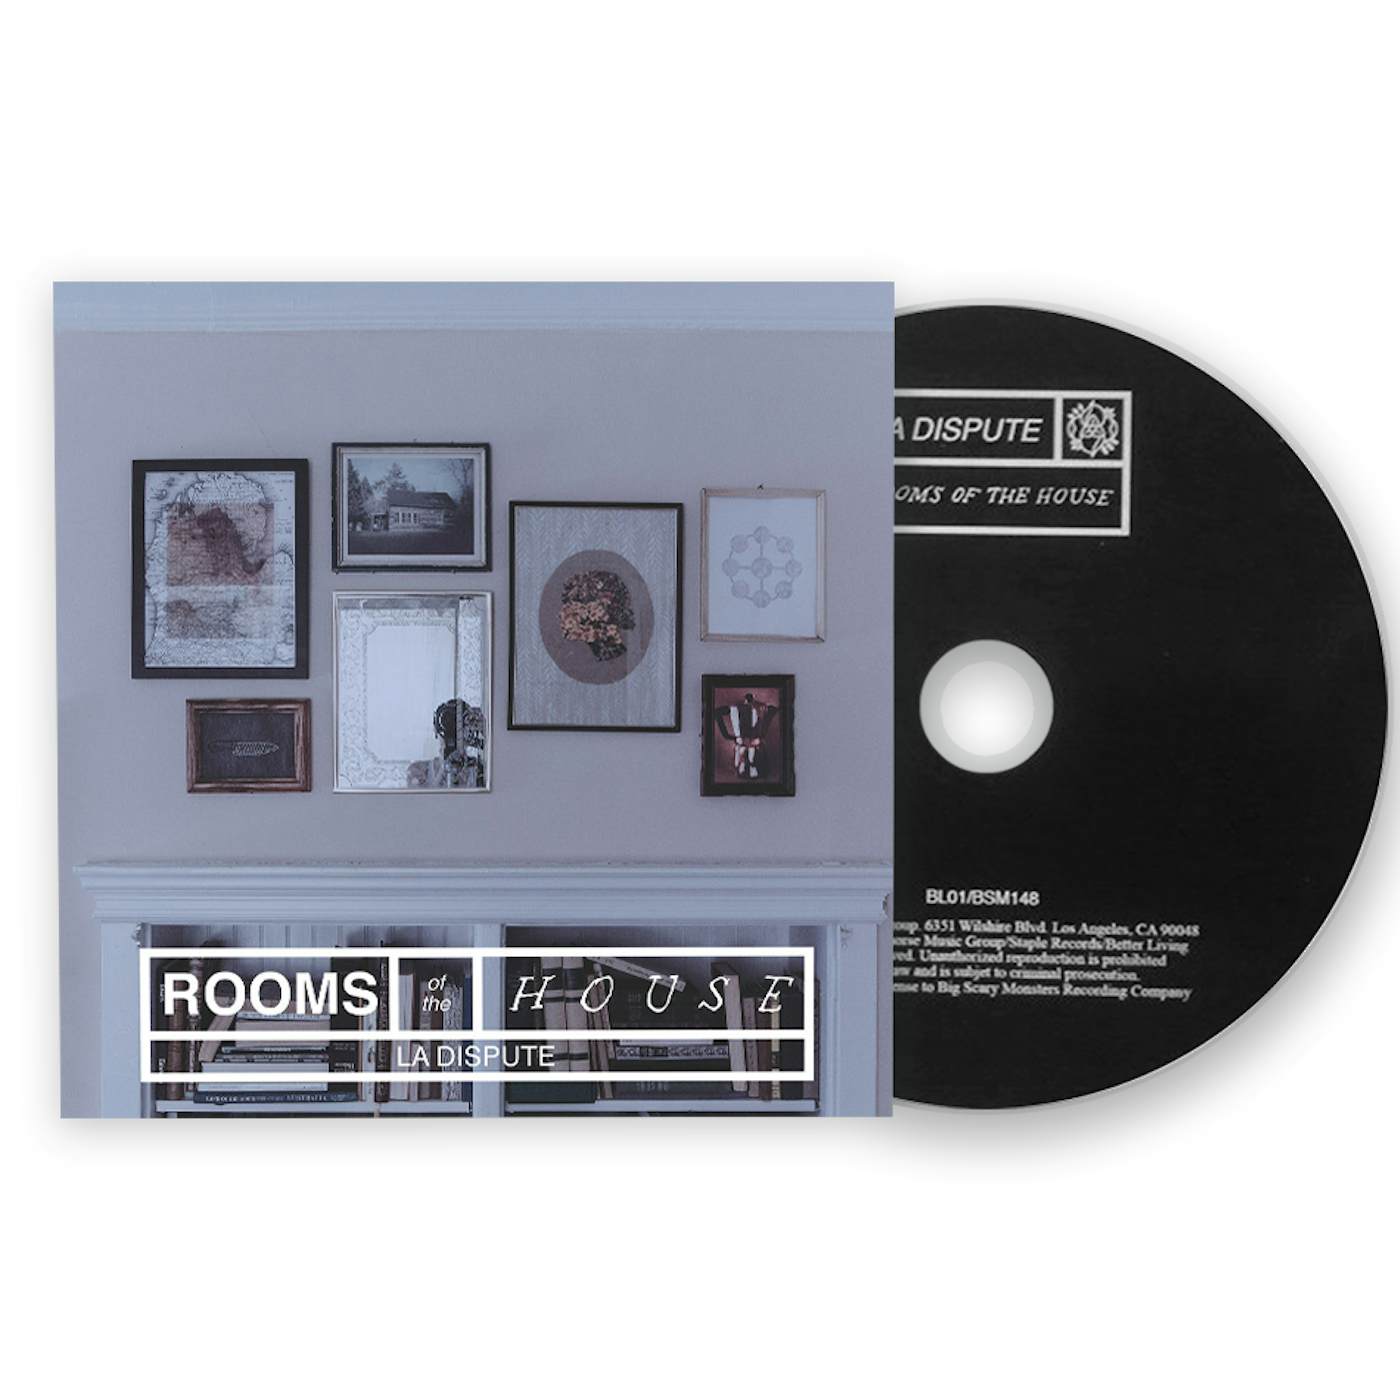 La Dispute - "Rooms Of The House" CD